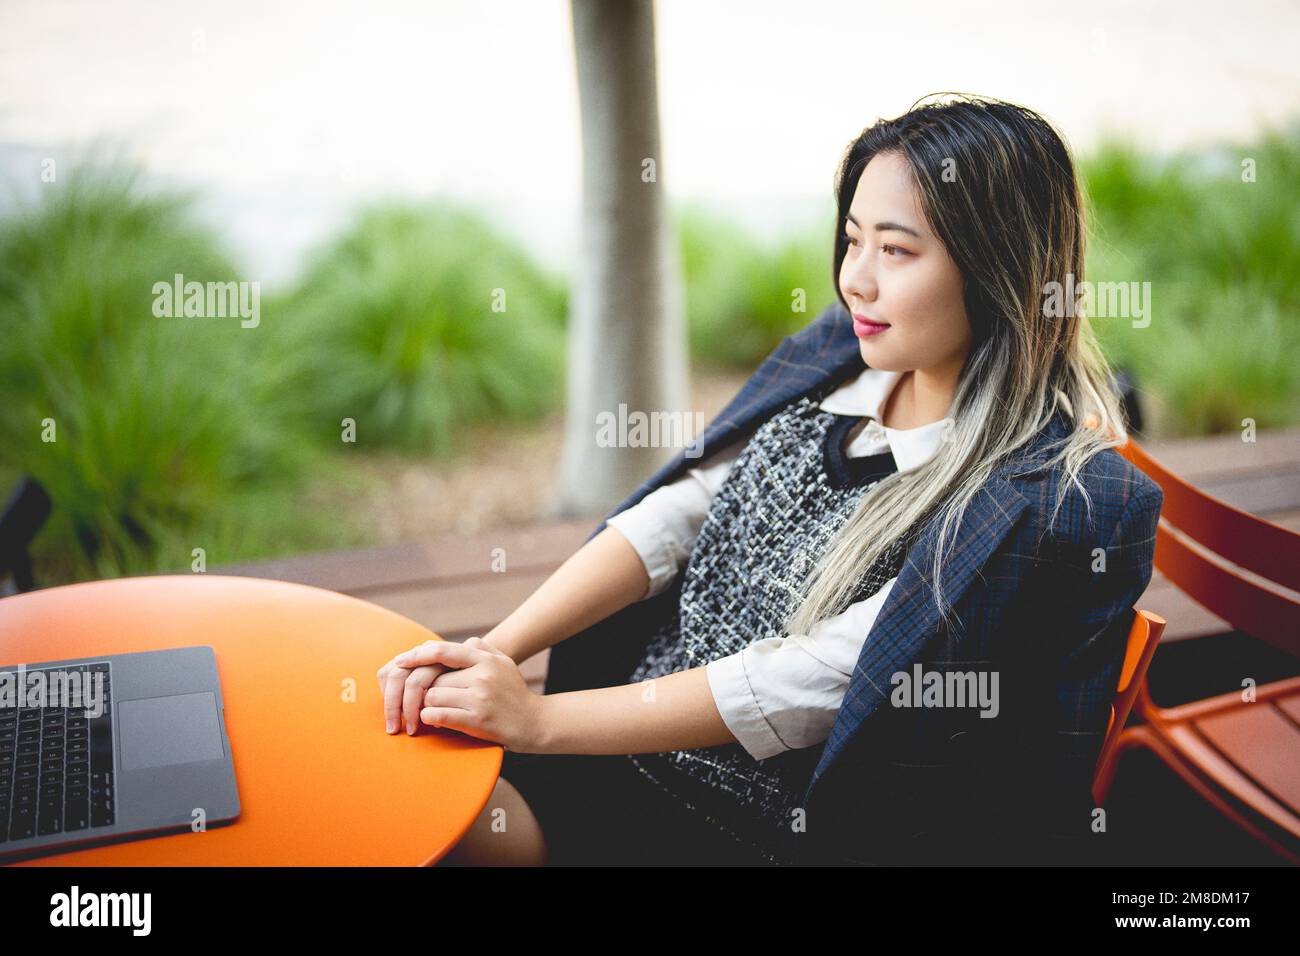 Young Woman Sitting Outdoors at an Orange Metal Table with Laptop Dressed for Autumn Weather Stock Photo